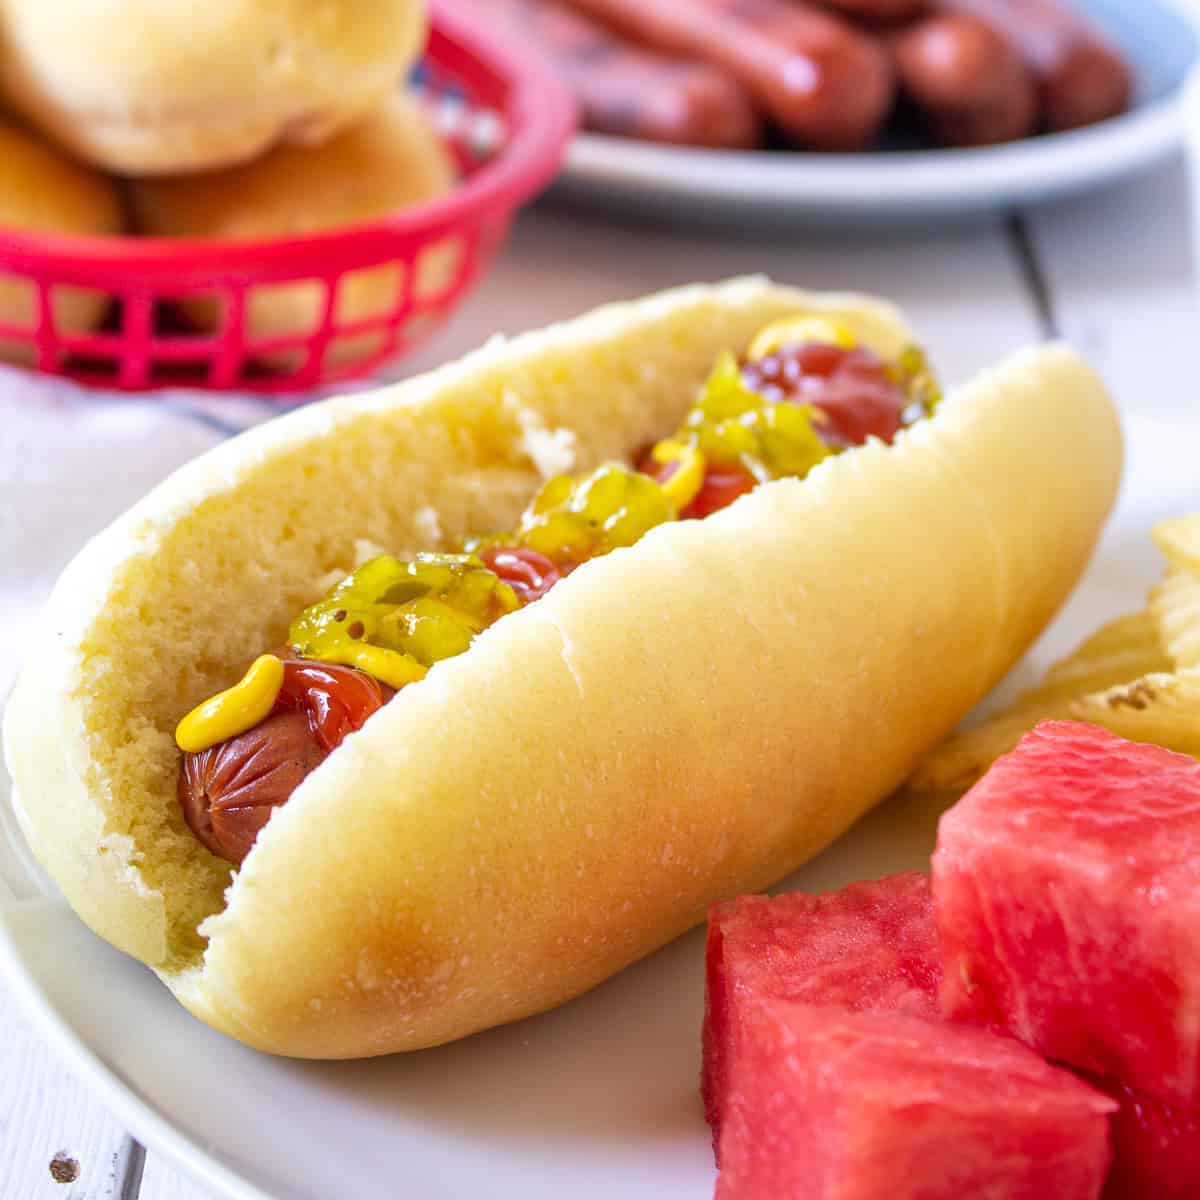 A hot dog bun with a hot dog topped with condiments.